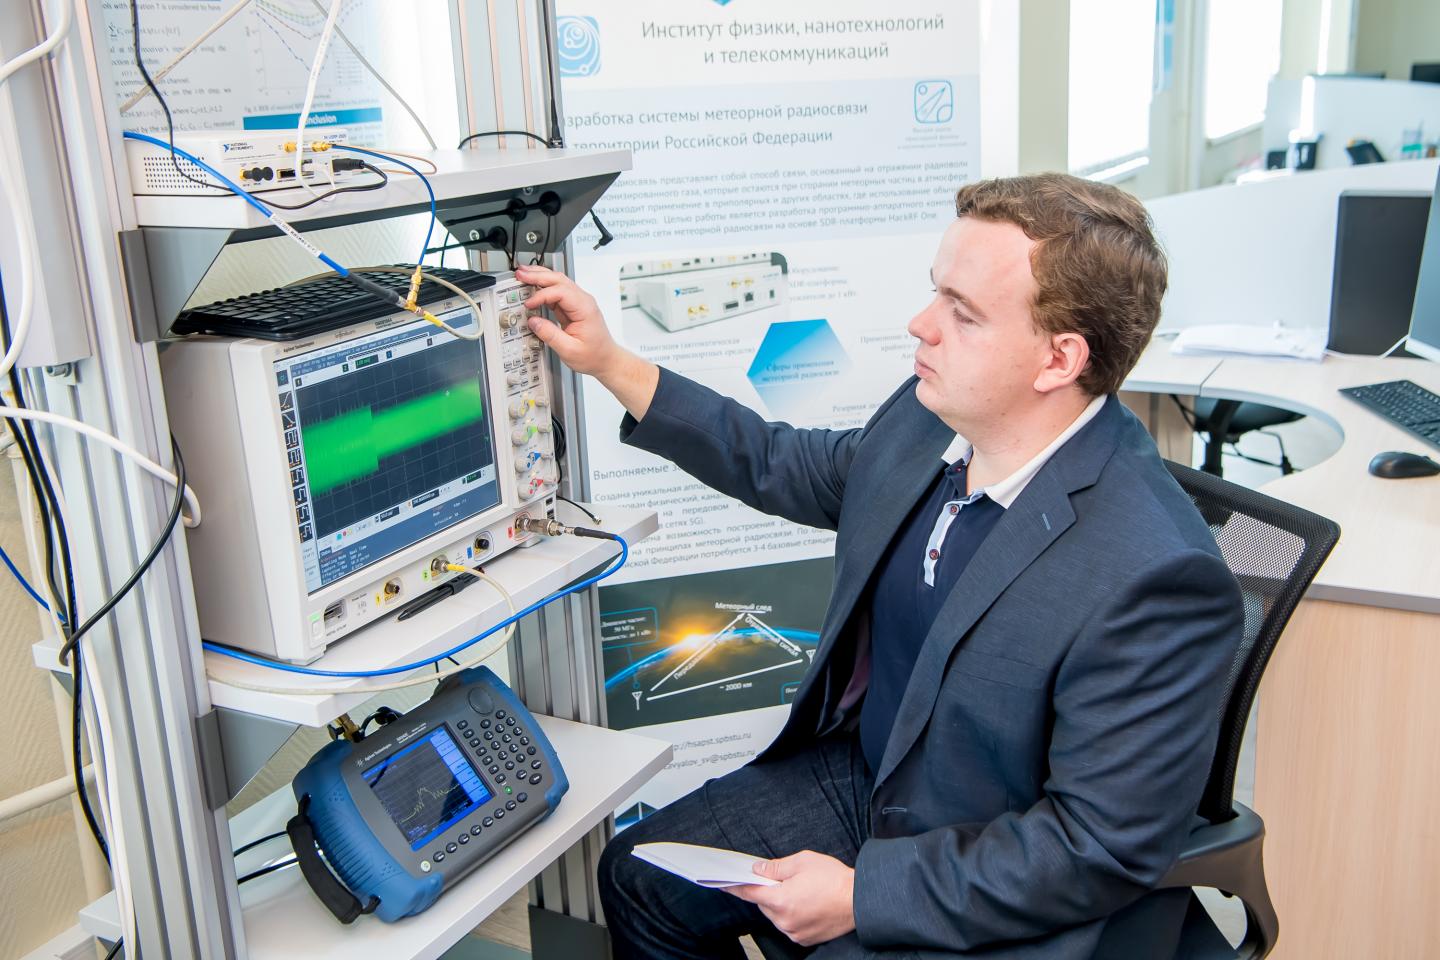 The Technology Is Used for Experimental Verification of Signals in Various Scenarios